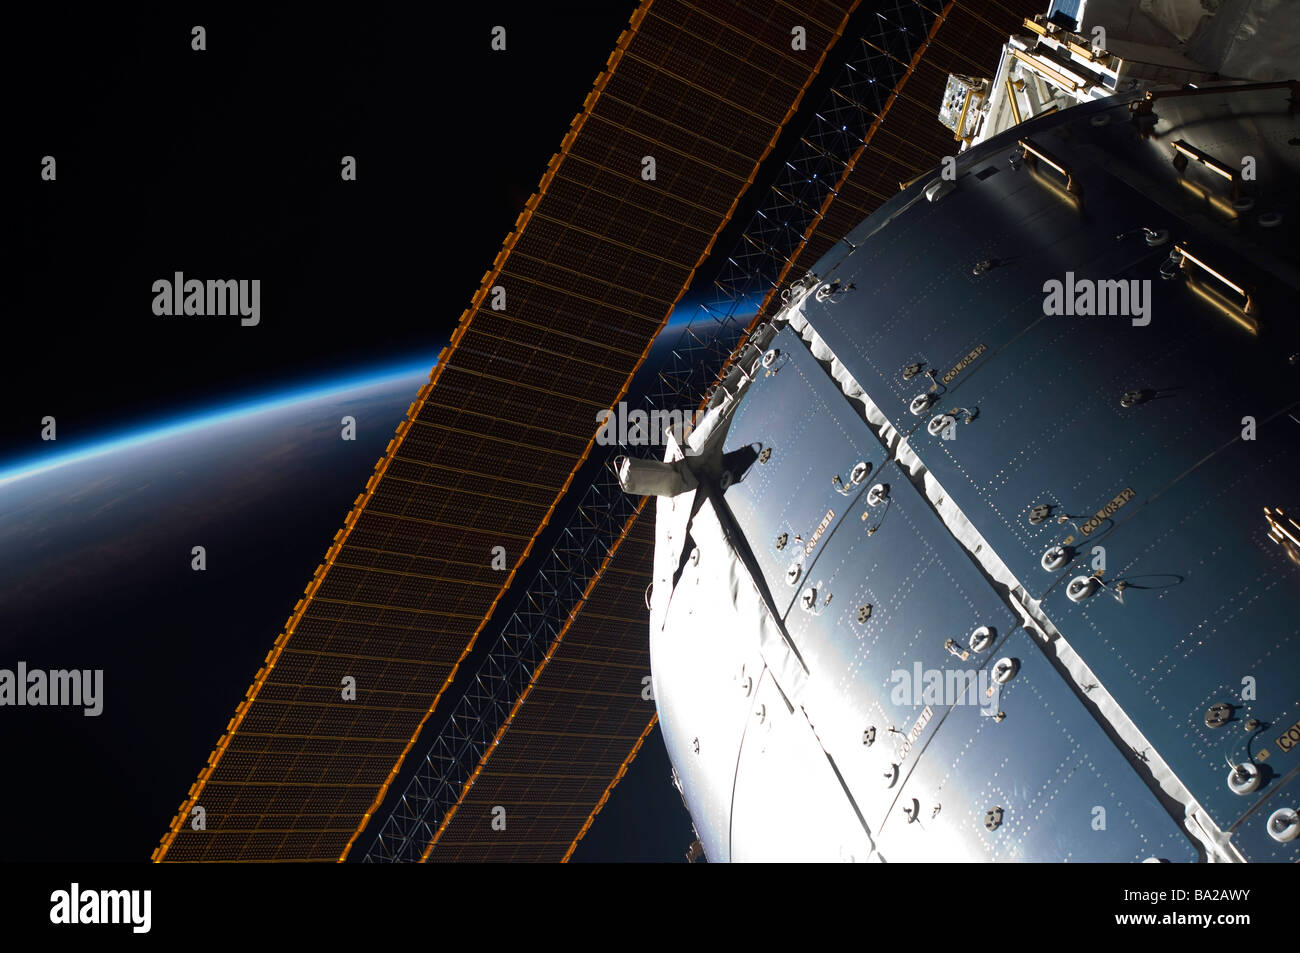 A portion of the International Space Station's Columbus laboratory and solar array panels. Stock Photo